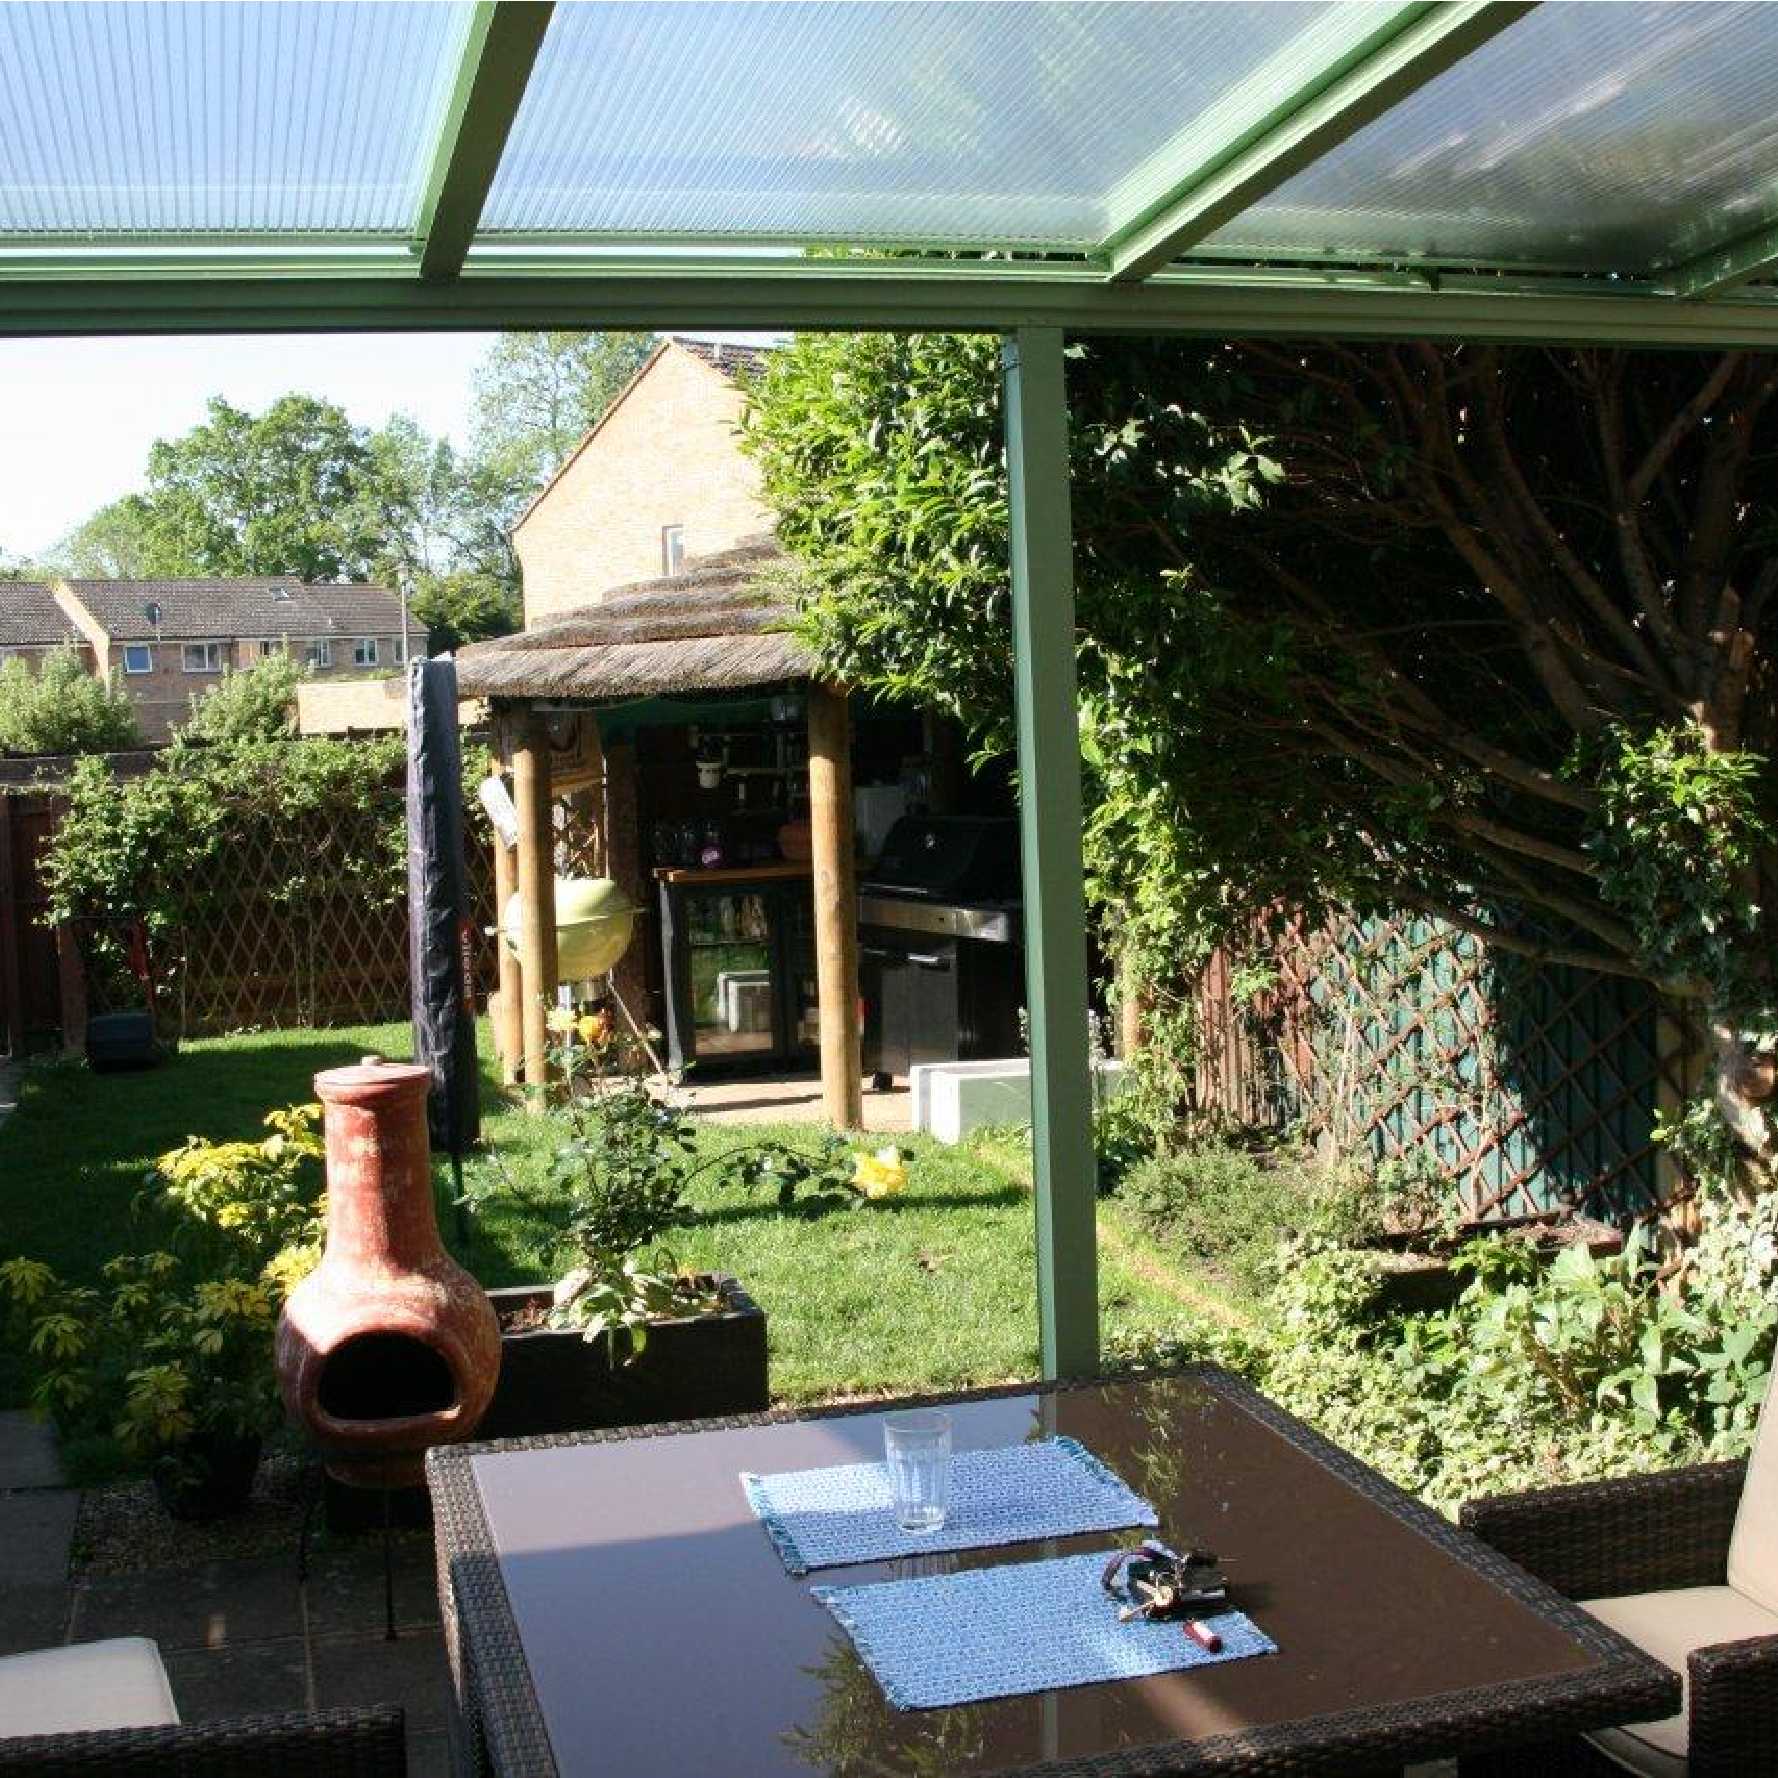 Affordable Omega Smart Lean-To Canopy, White with 16mm Polycarbonate Glazing - 4.9m (W) x 4.0m (P), (3) Supporting Posts